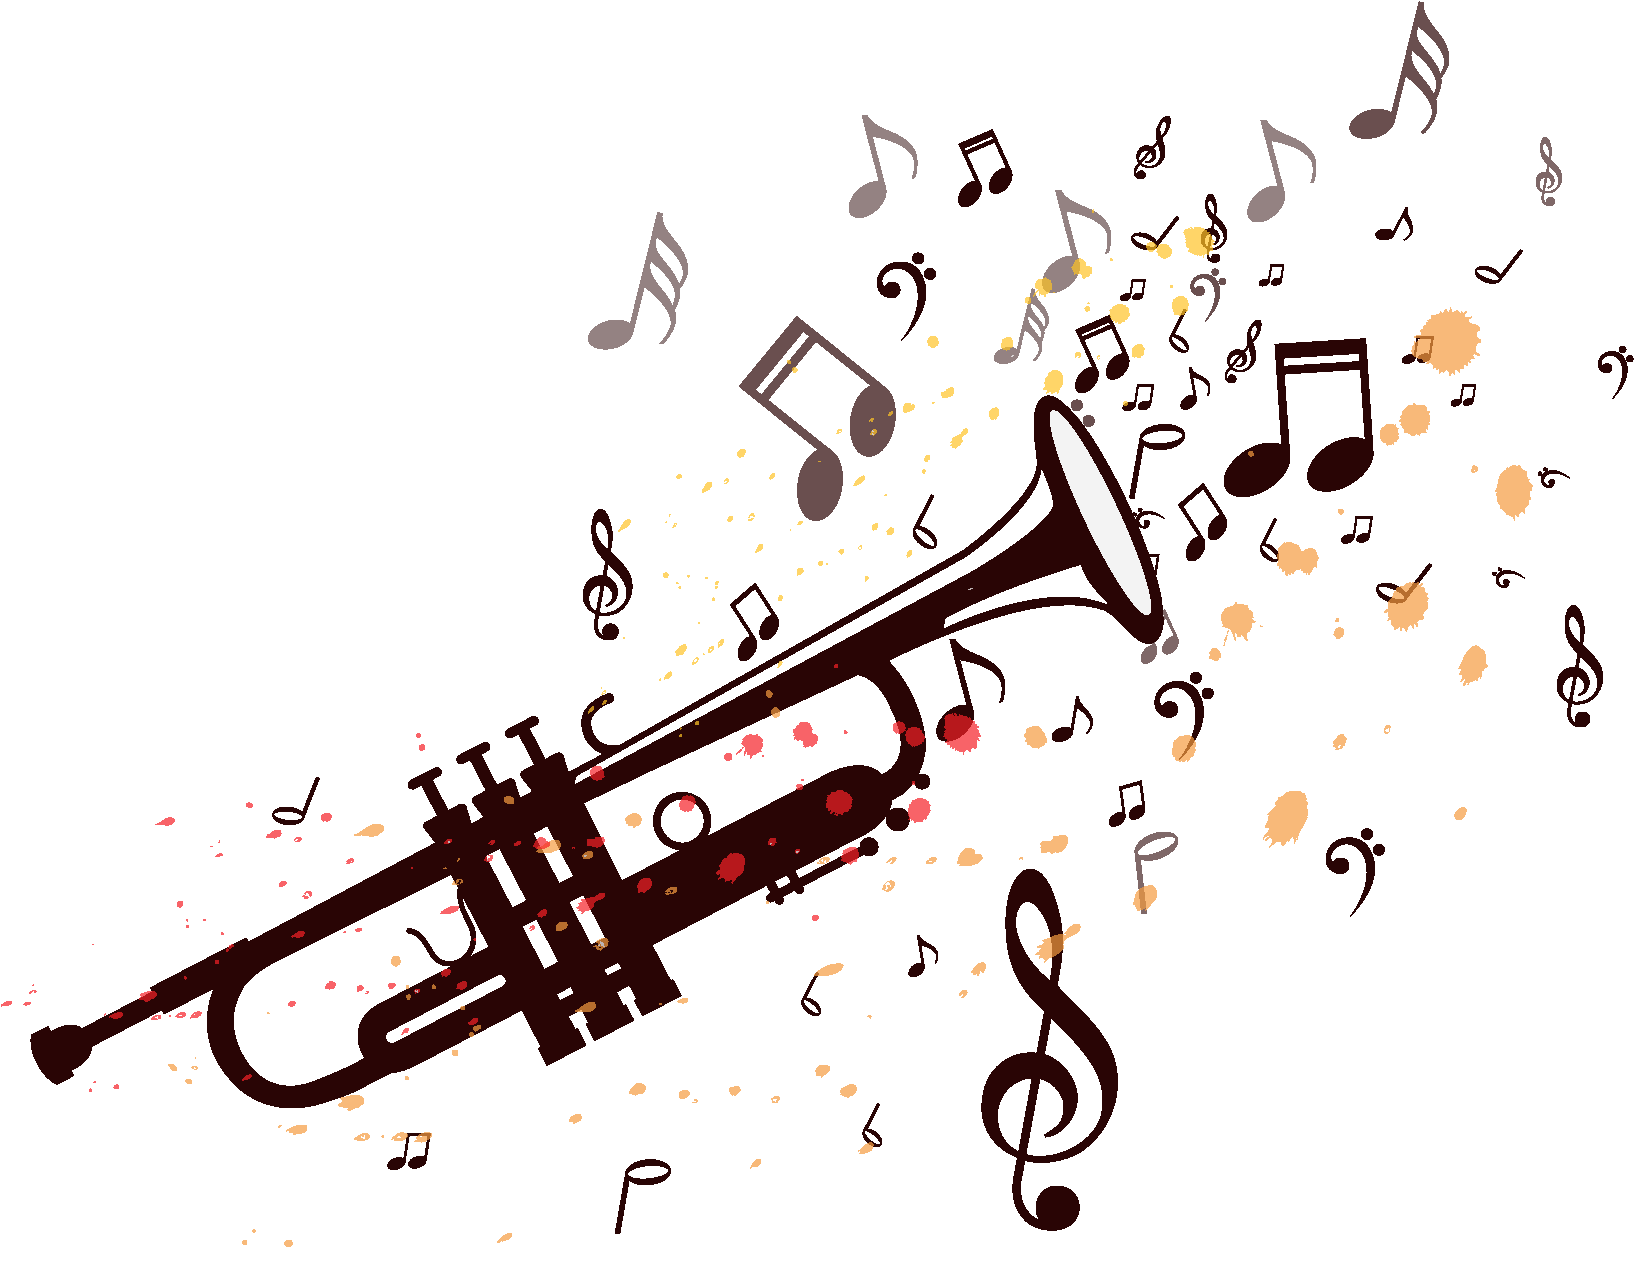 A Trumpet With Music Notes